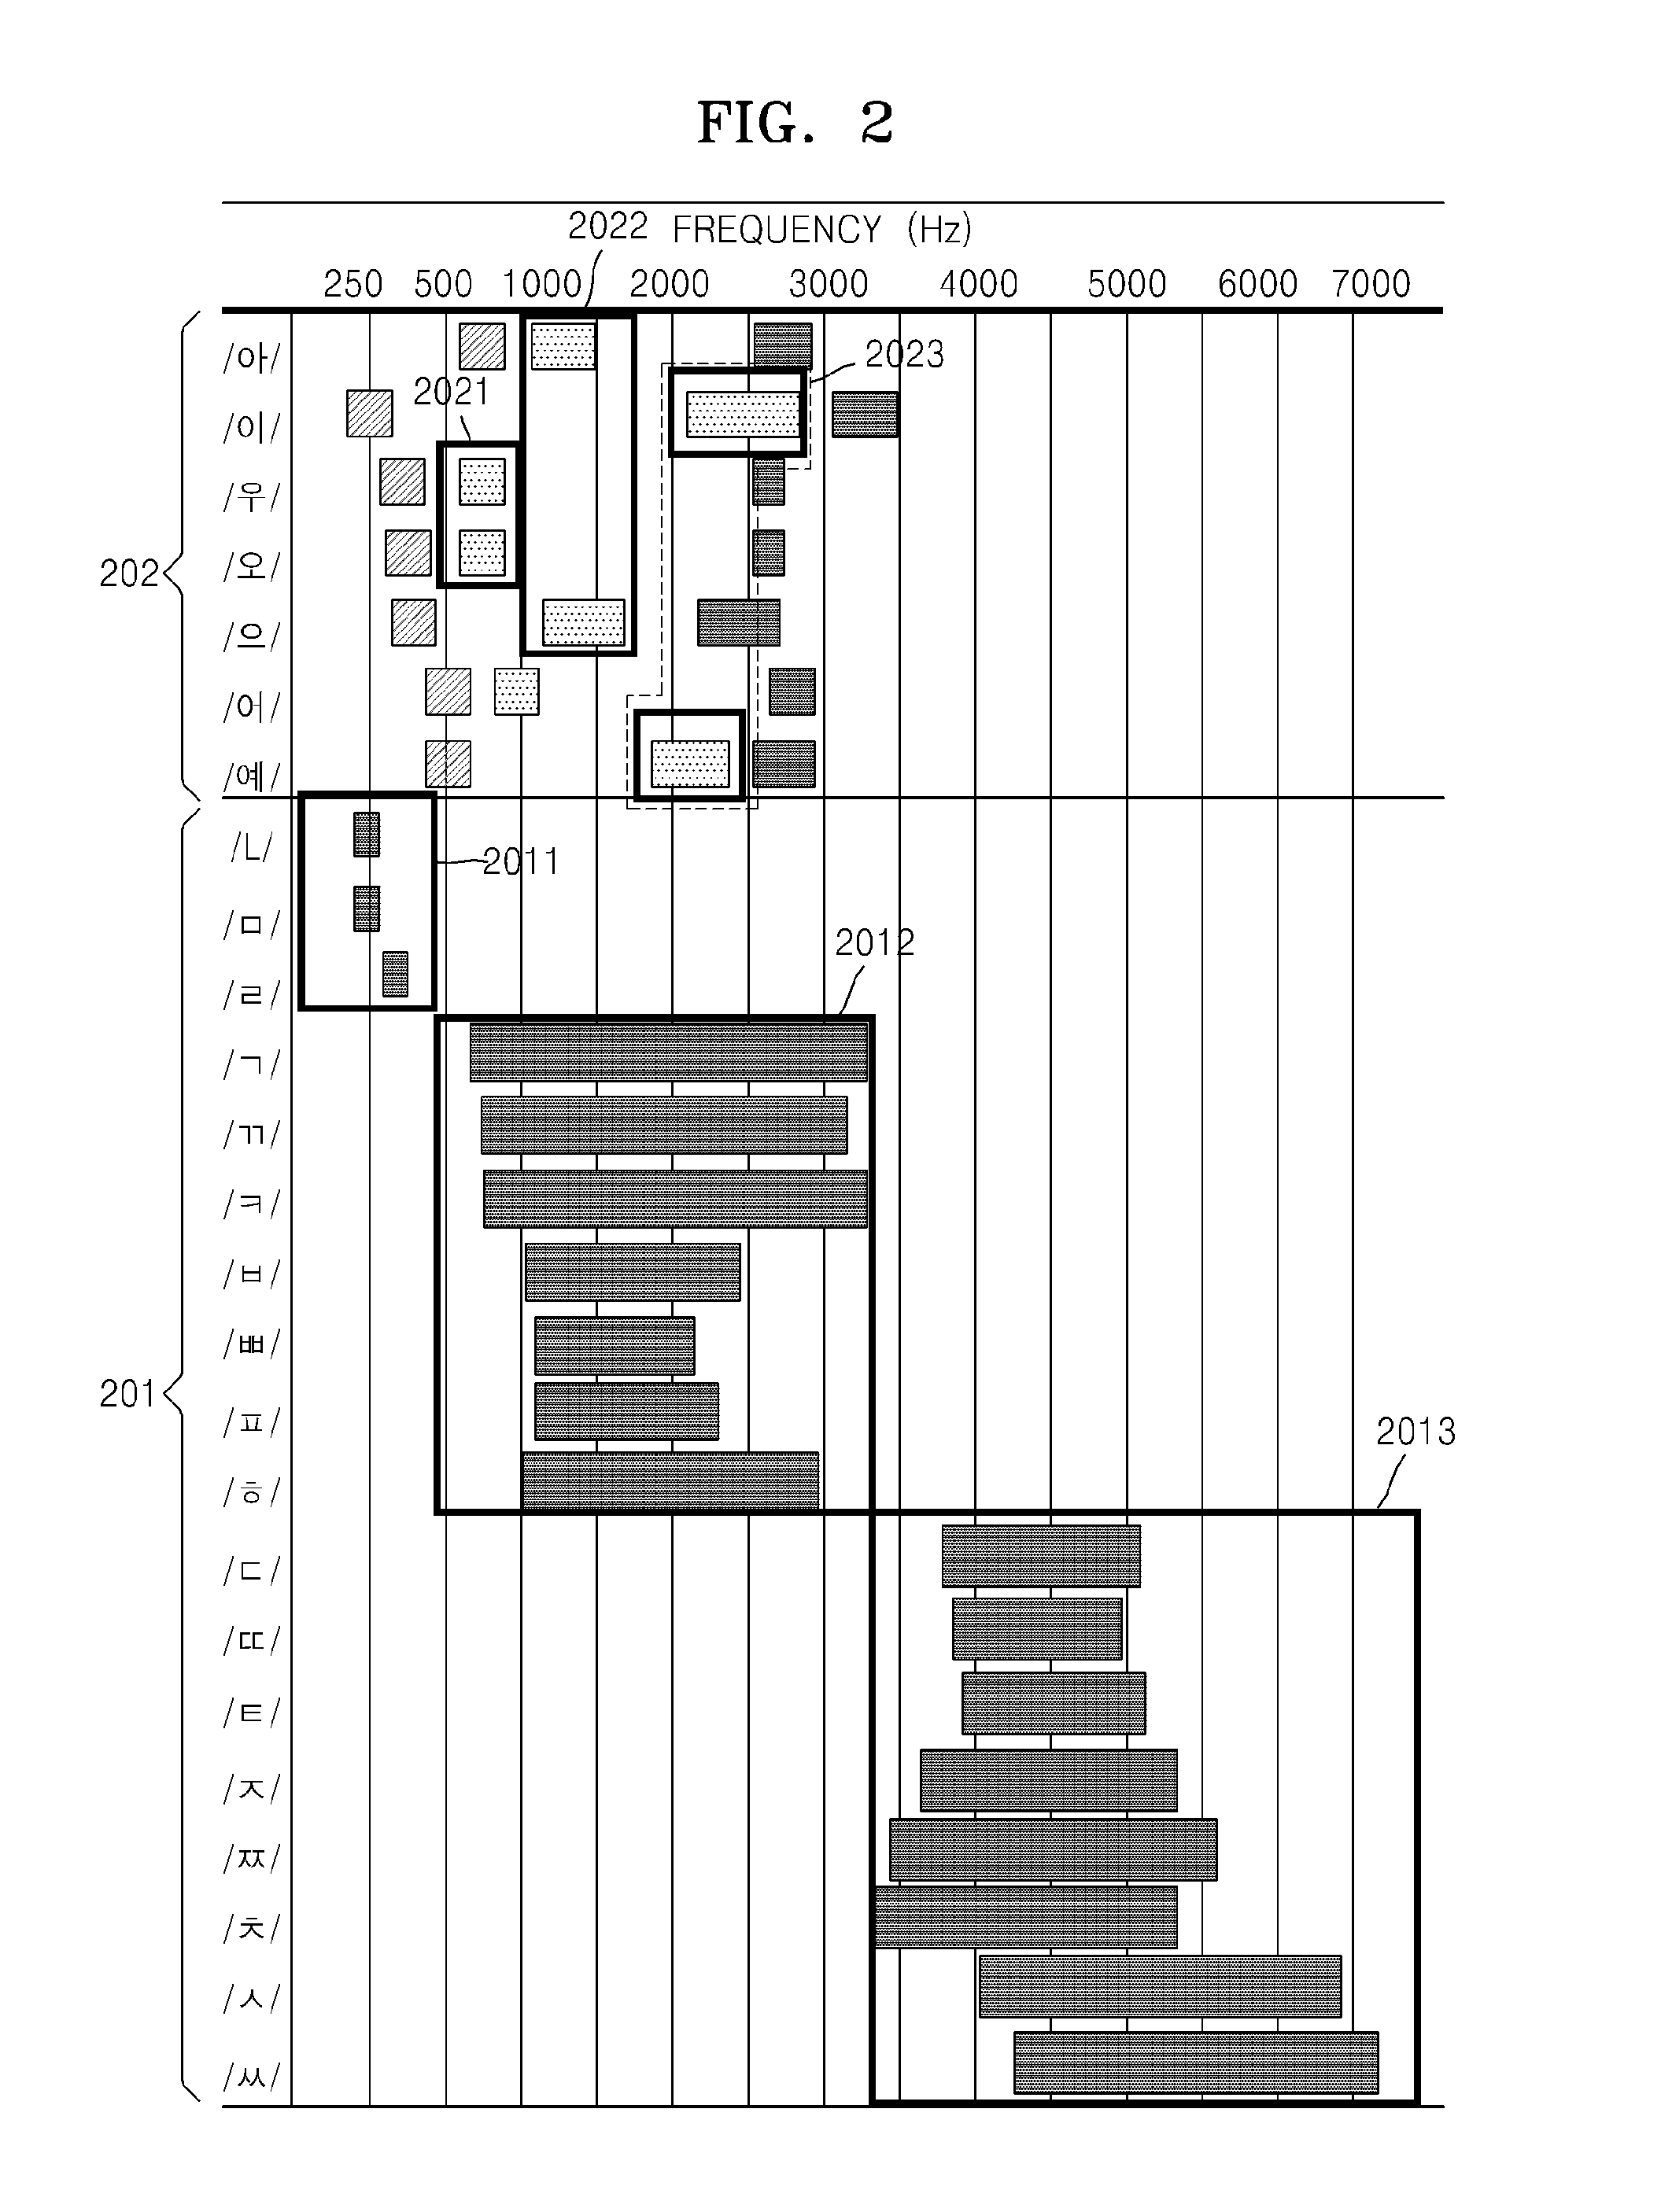 Portable sound source reproducing apparatus for testing hearing ability and method using the same